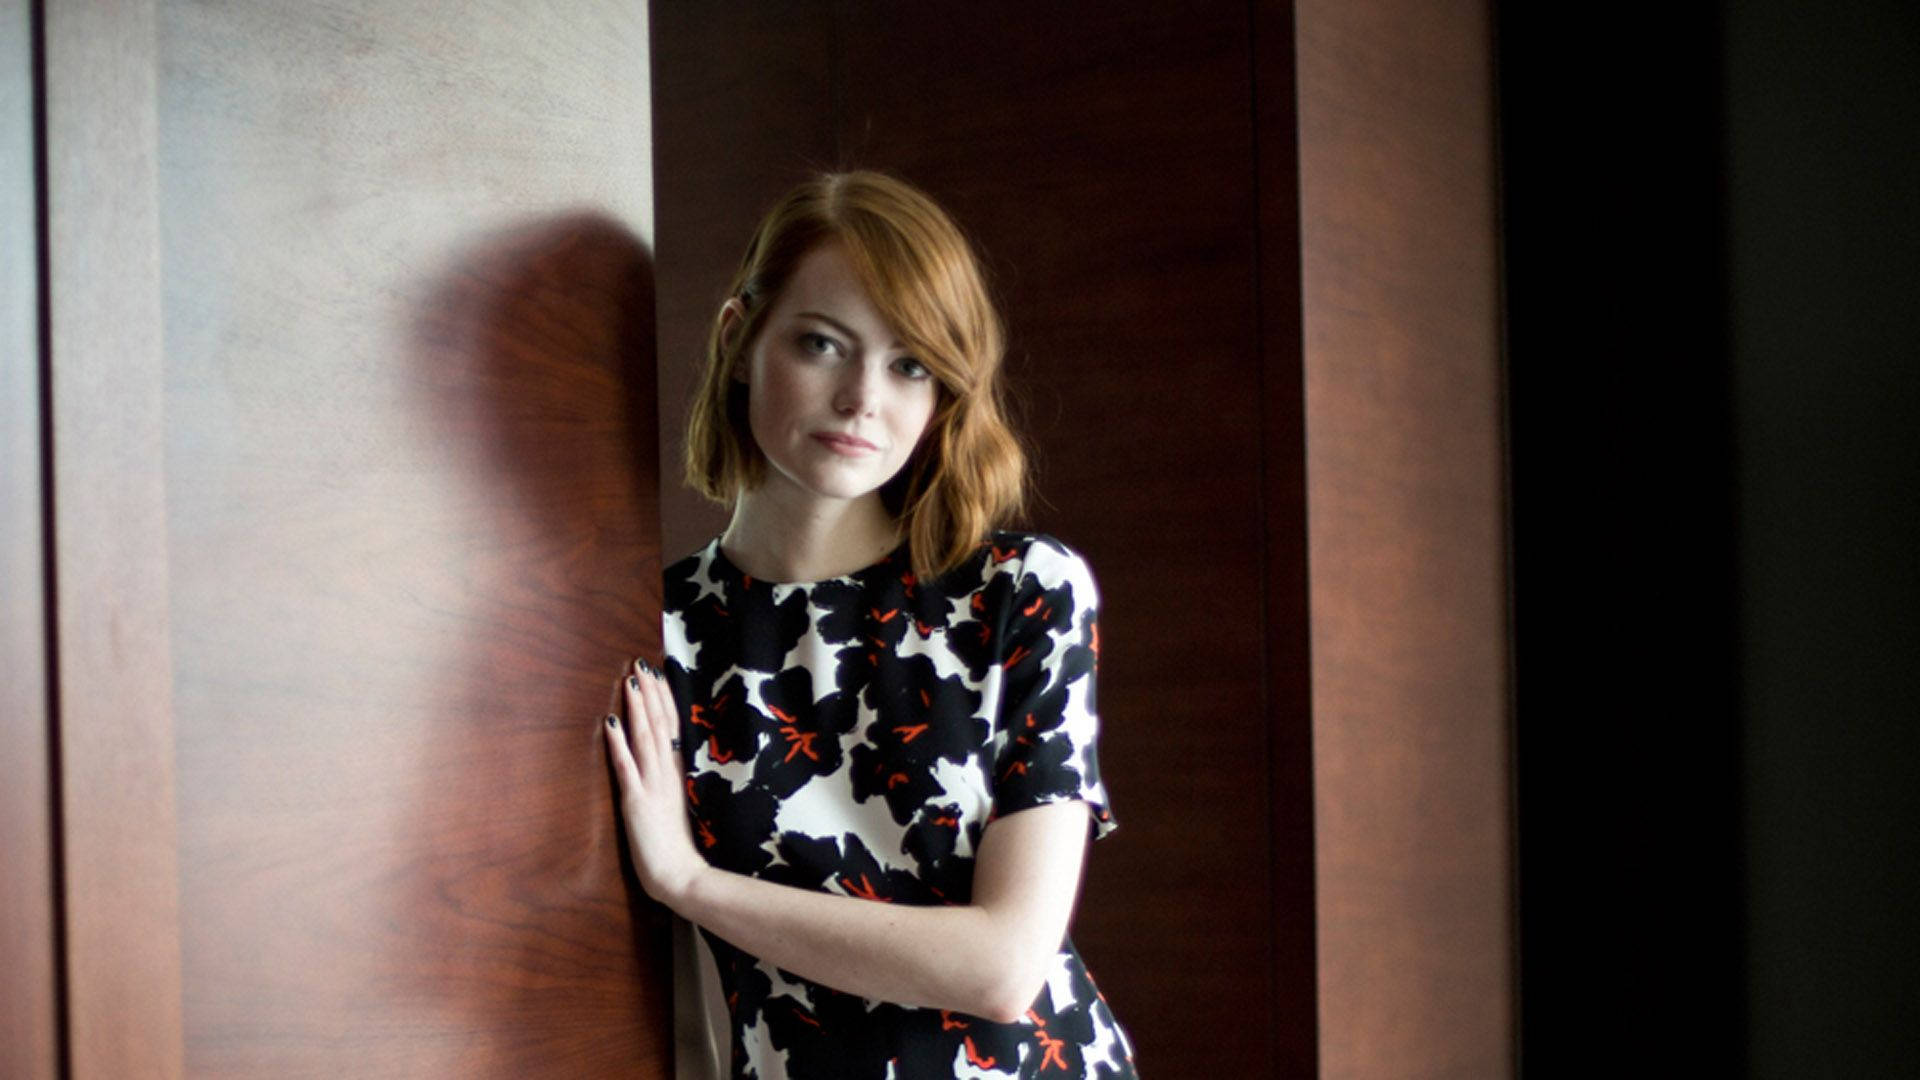 Emma Stone smiles confidently in a stunning portrait. Wallpaper